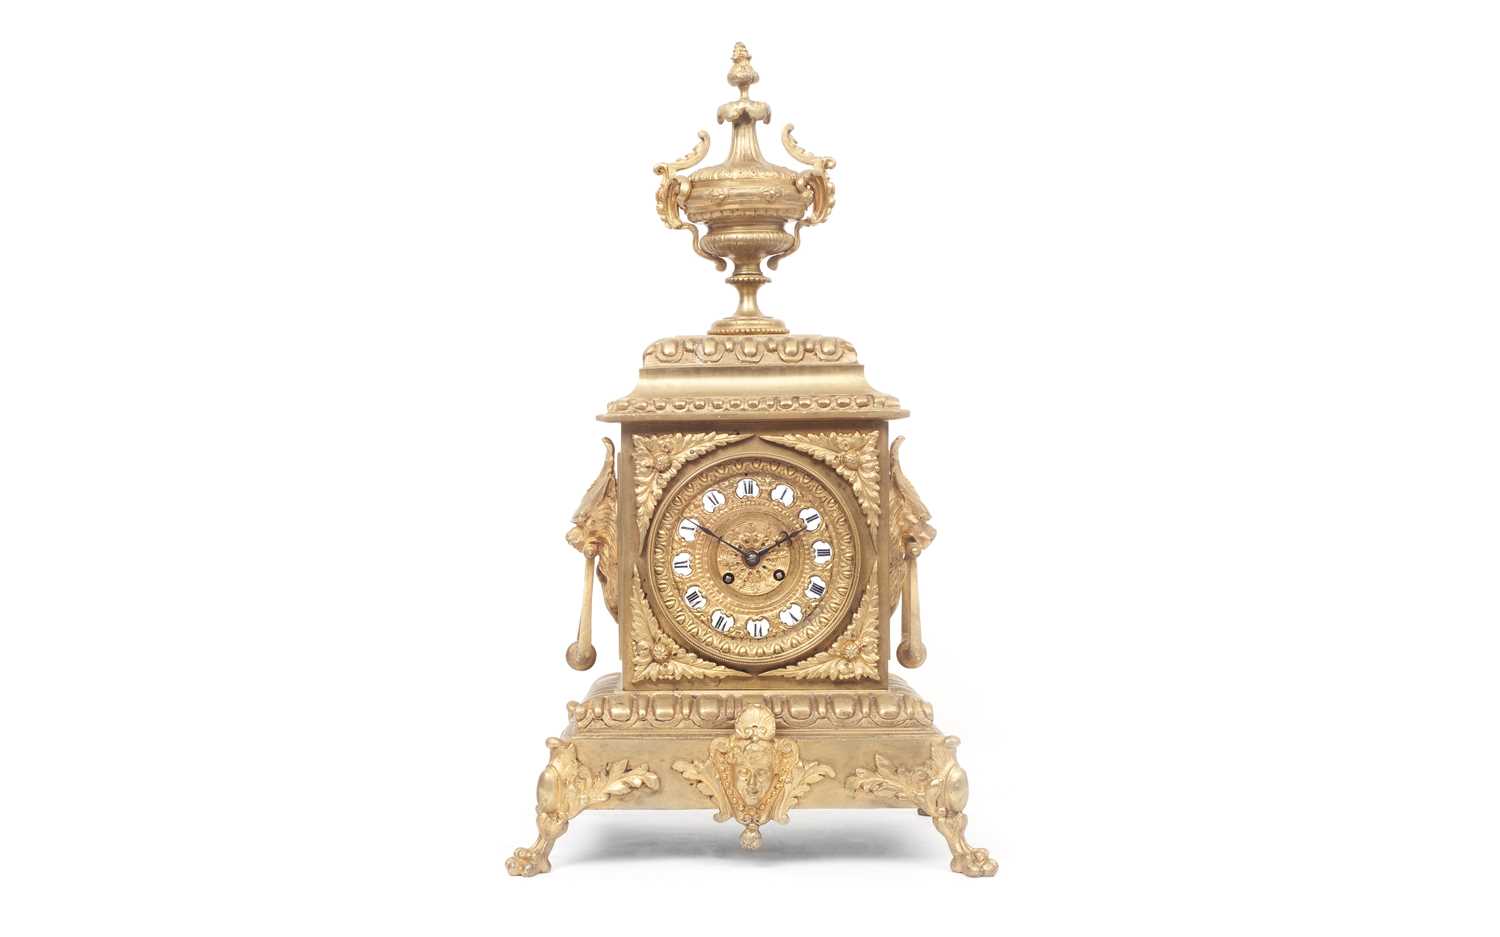 A LARGE LATE 19TH CENTURY FRENCH GILT BRONZE MANTEL CLOCK